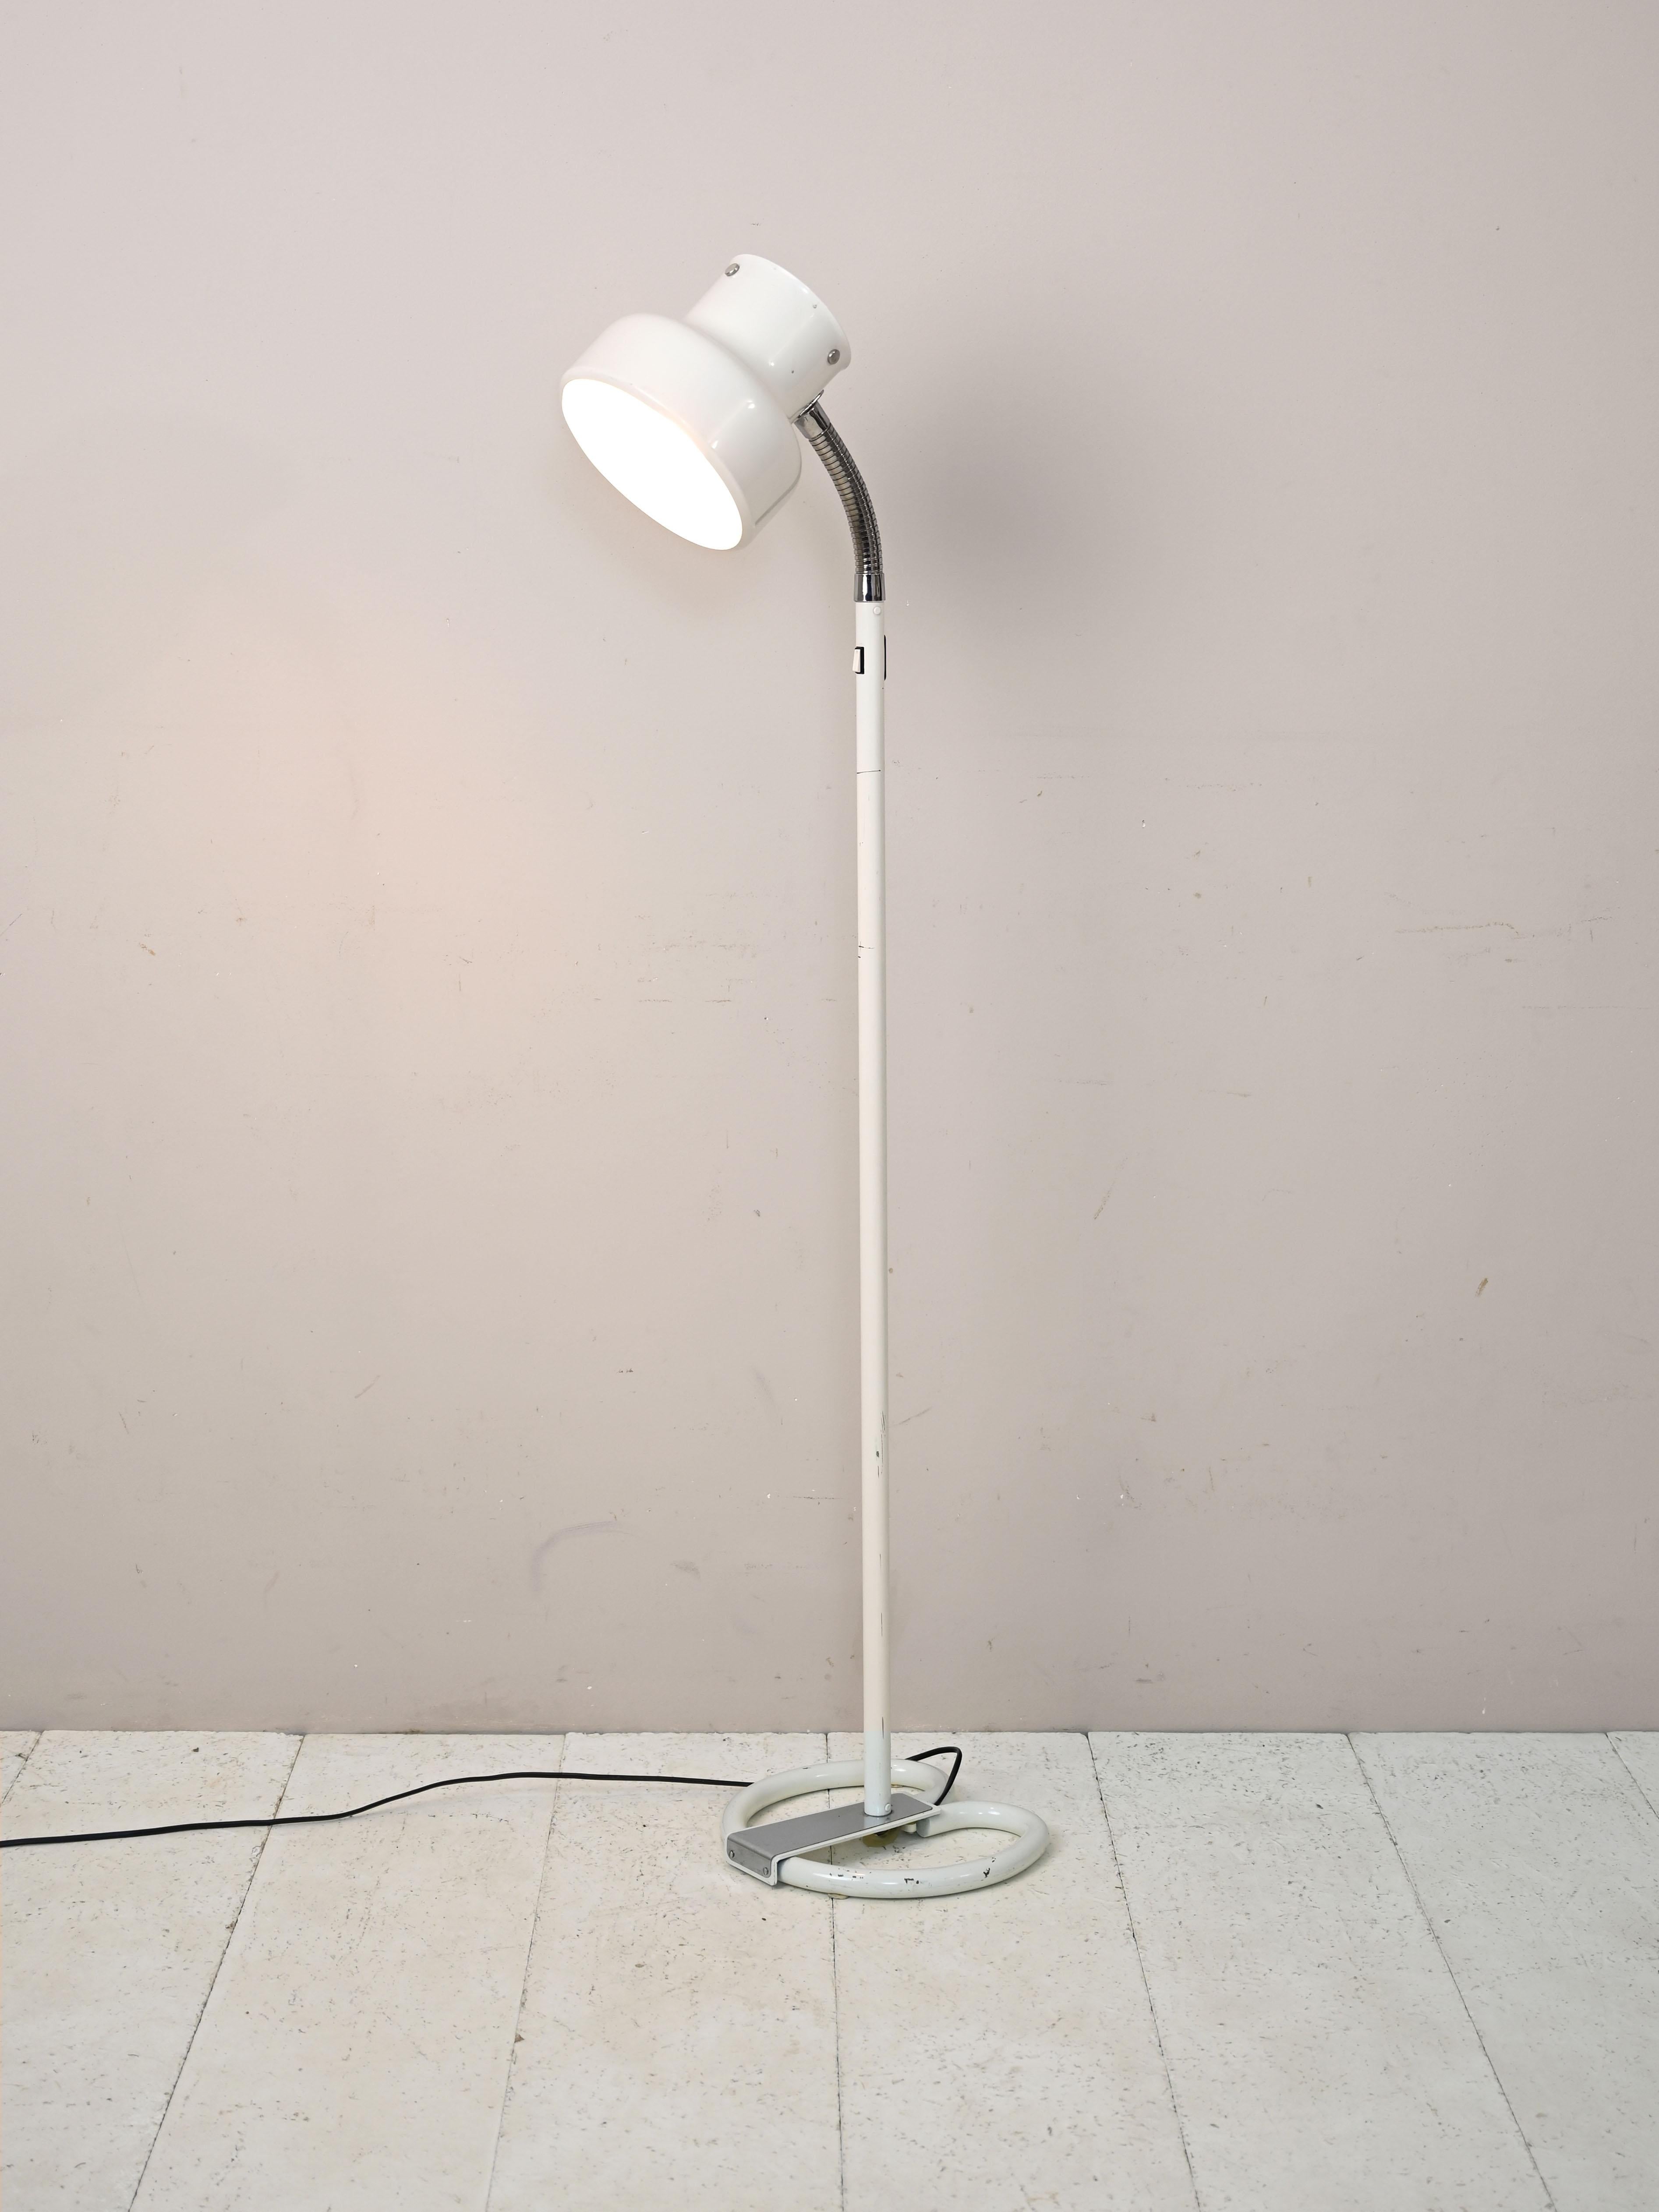 White lacquered metal floor lamp produced by Ateljé Lyktan.

This lamp model designed by Anders Pehrson is part of the Bluming series. The design features a lampshade that can be adjusted to different positions and a tubular metal base.

Good